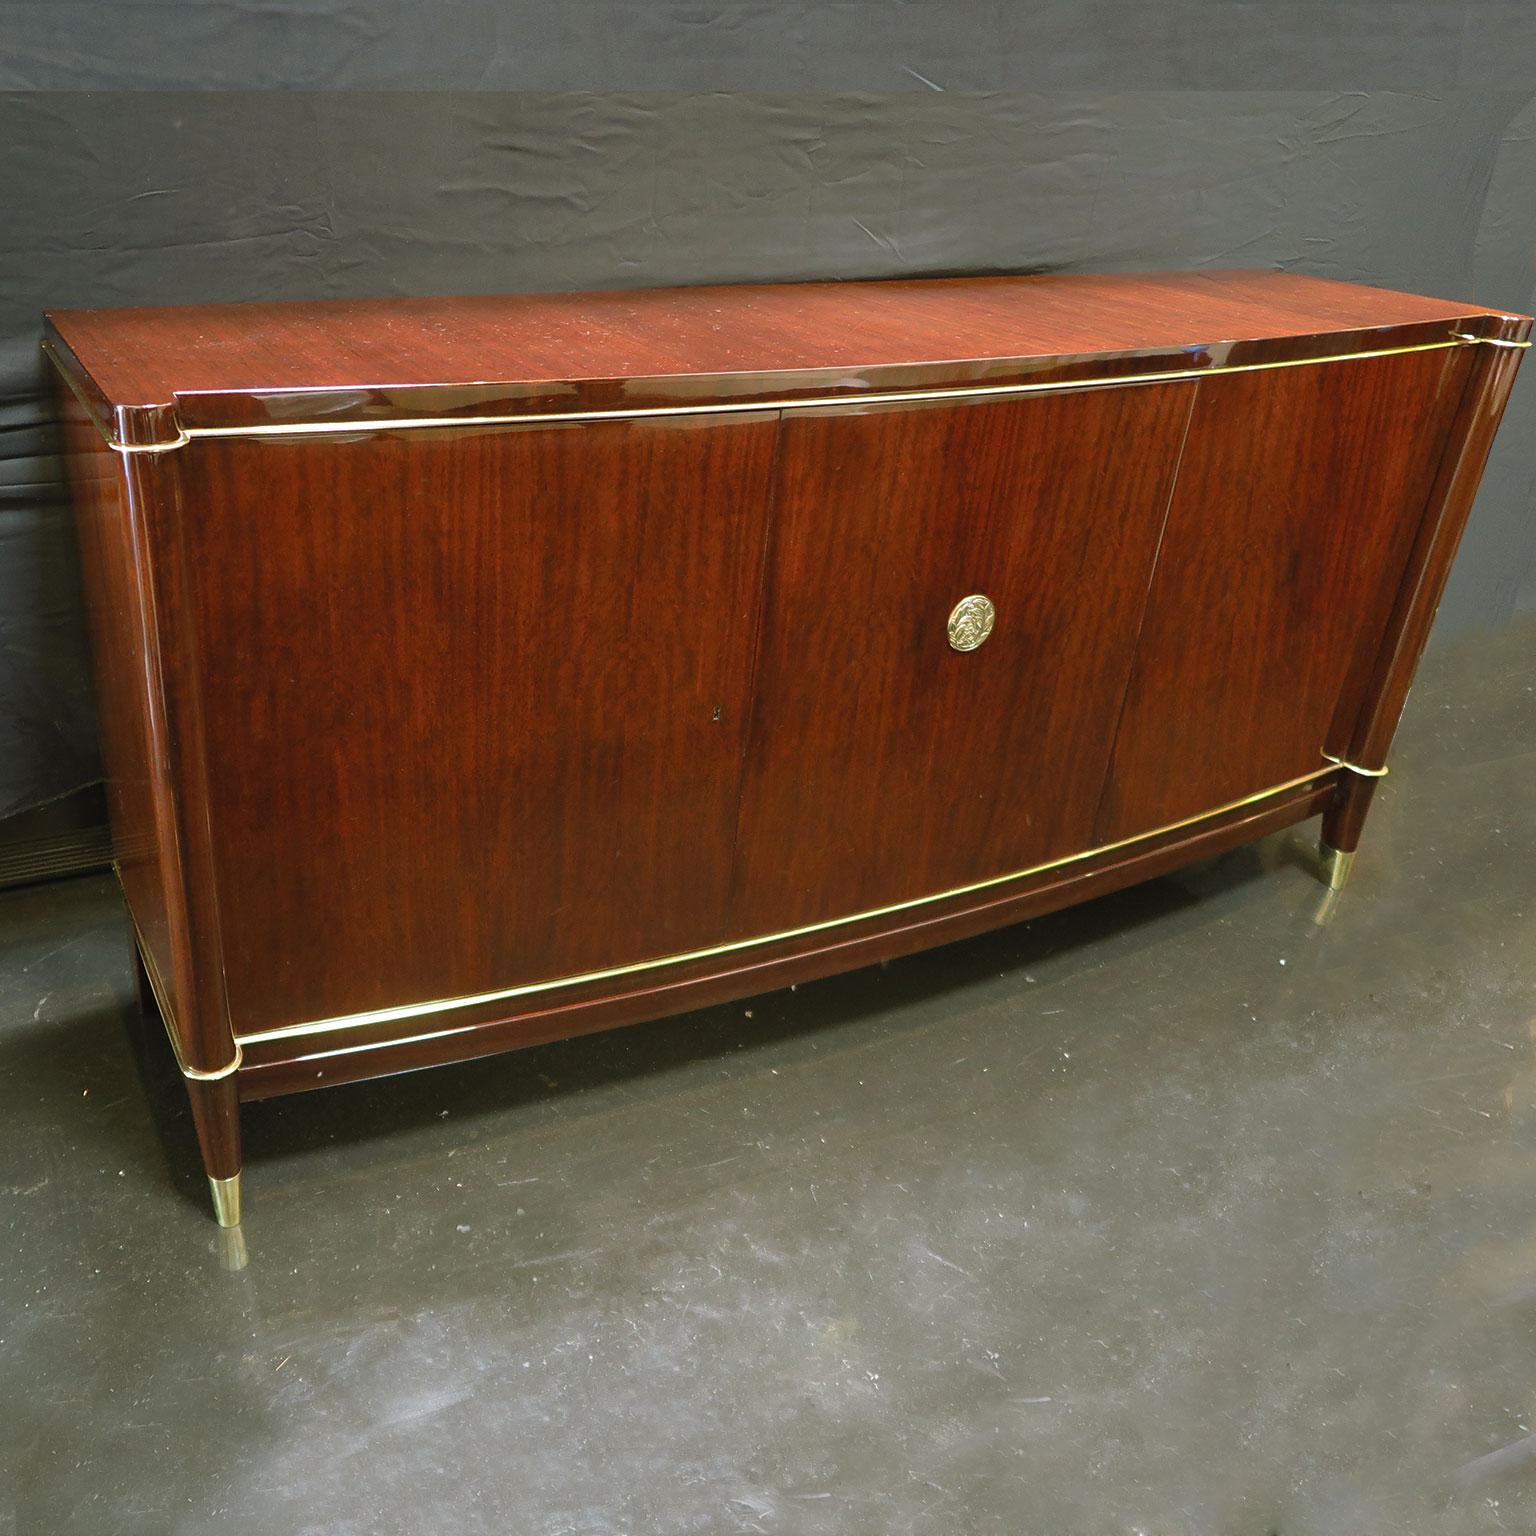 Classic Art Deco sideboard by Belgium brothers De Coene Frères. Beautifully veneered in rosewood with brass detailing along top and bottom borders. Signature medallion with florals in brass on center door of buffet. Two right doors open to larger